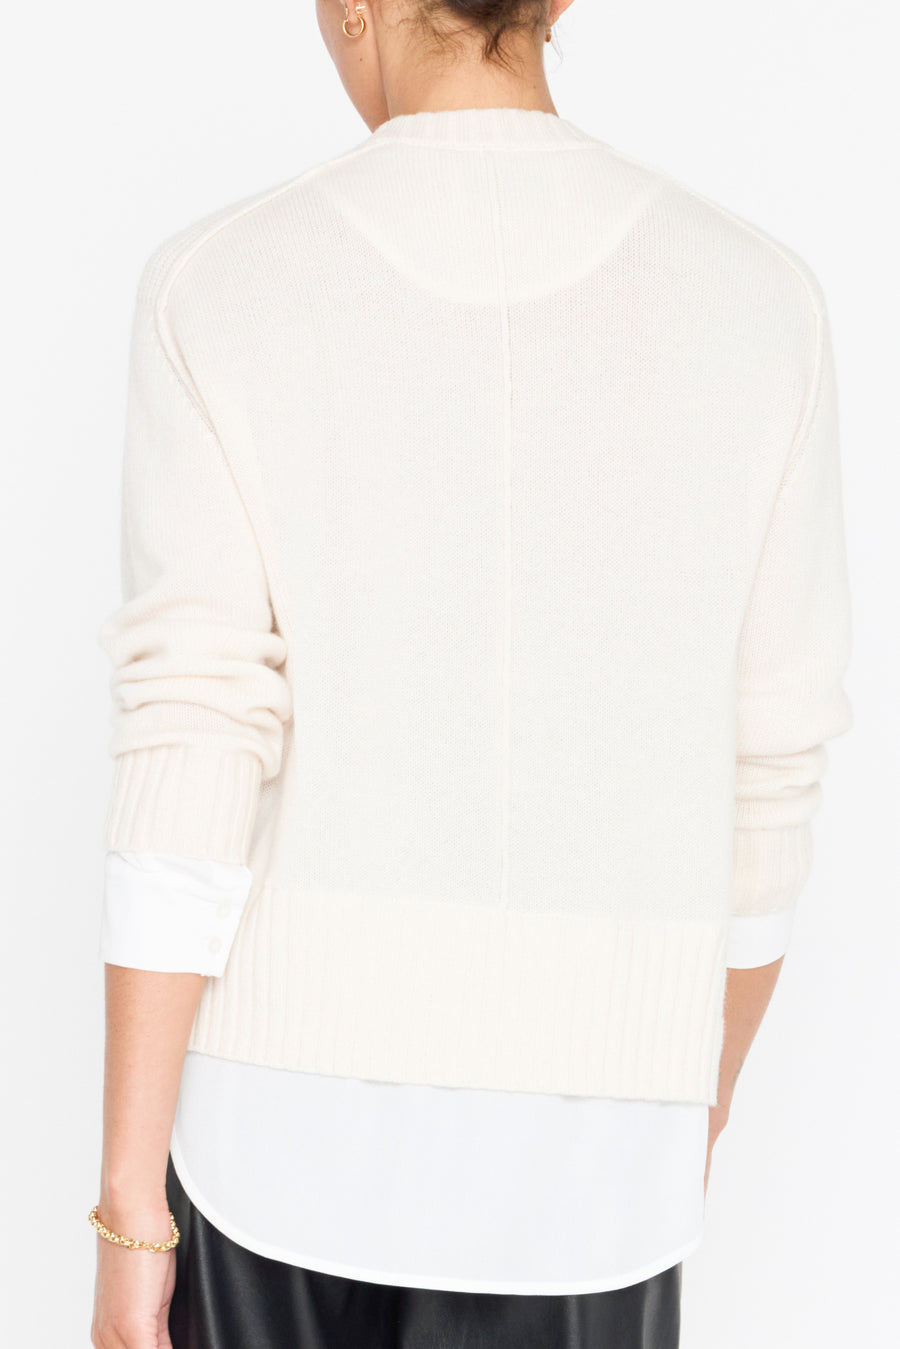 Parson cashmere-wool layered crewneck white sweater back view